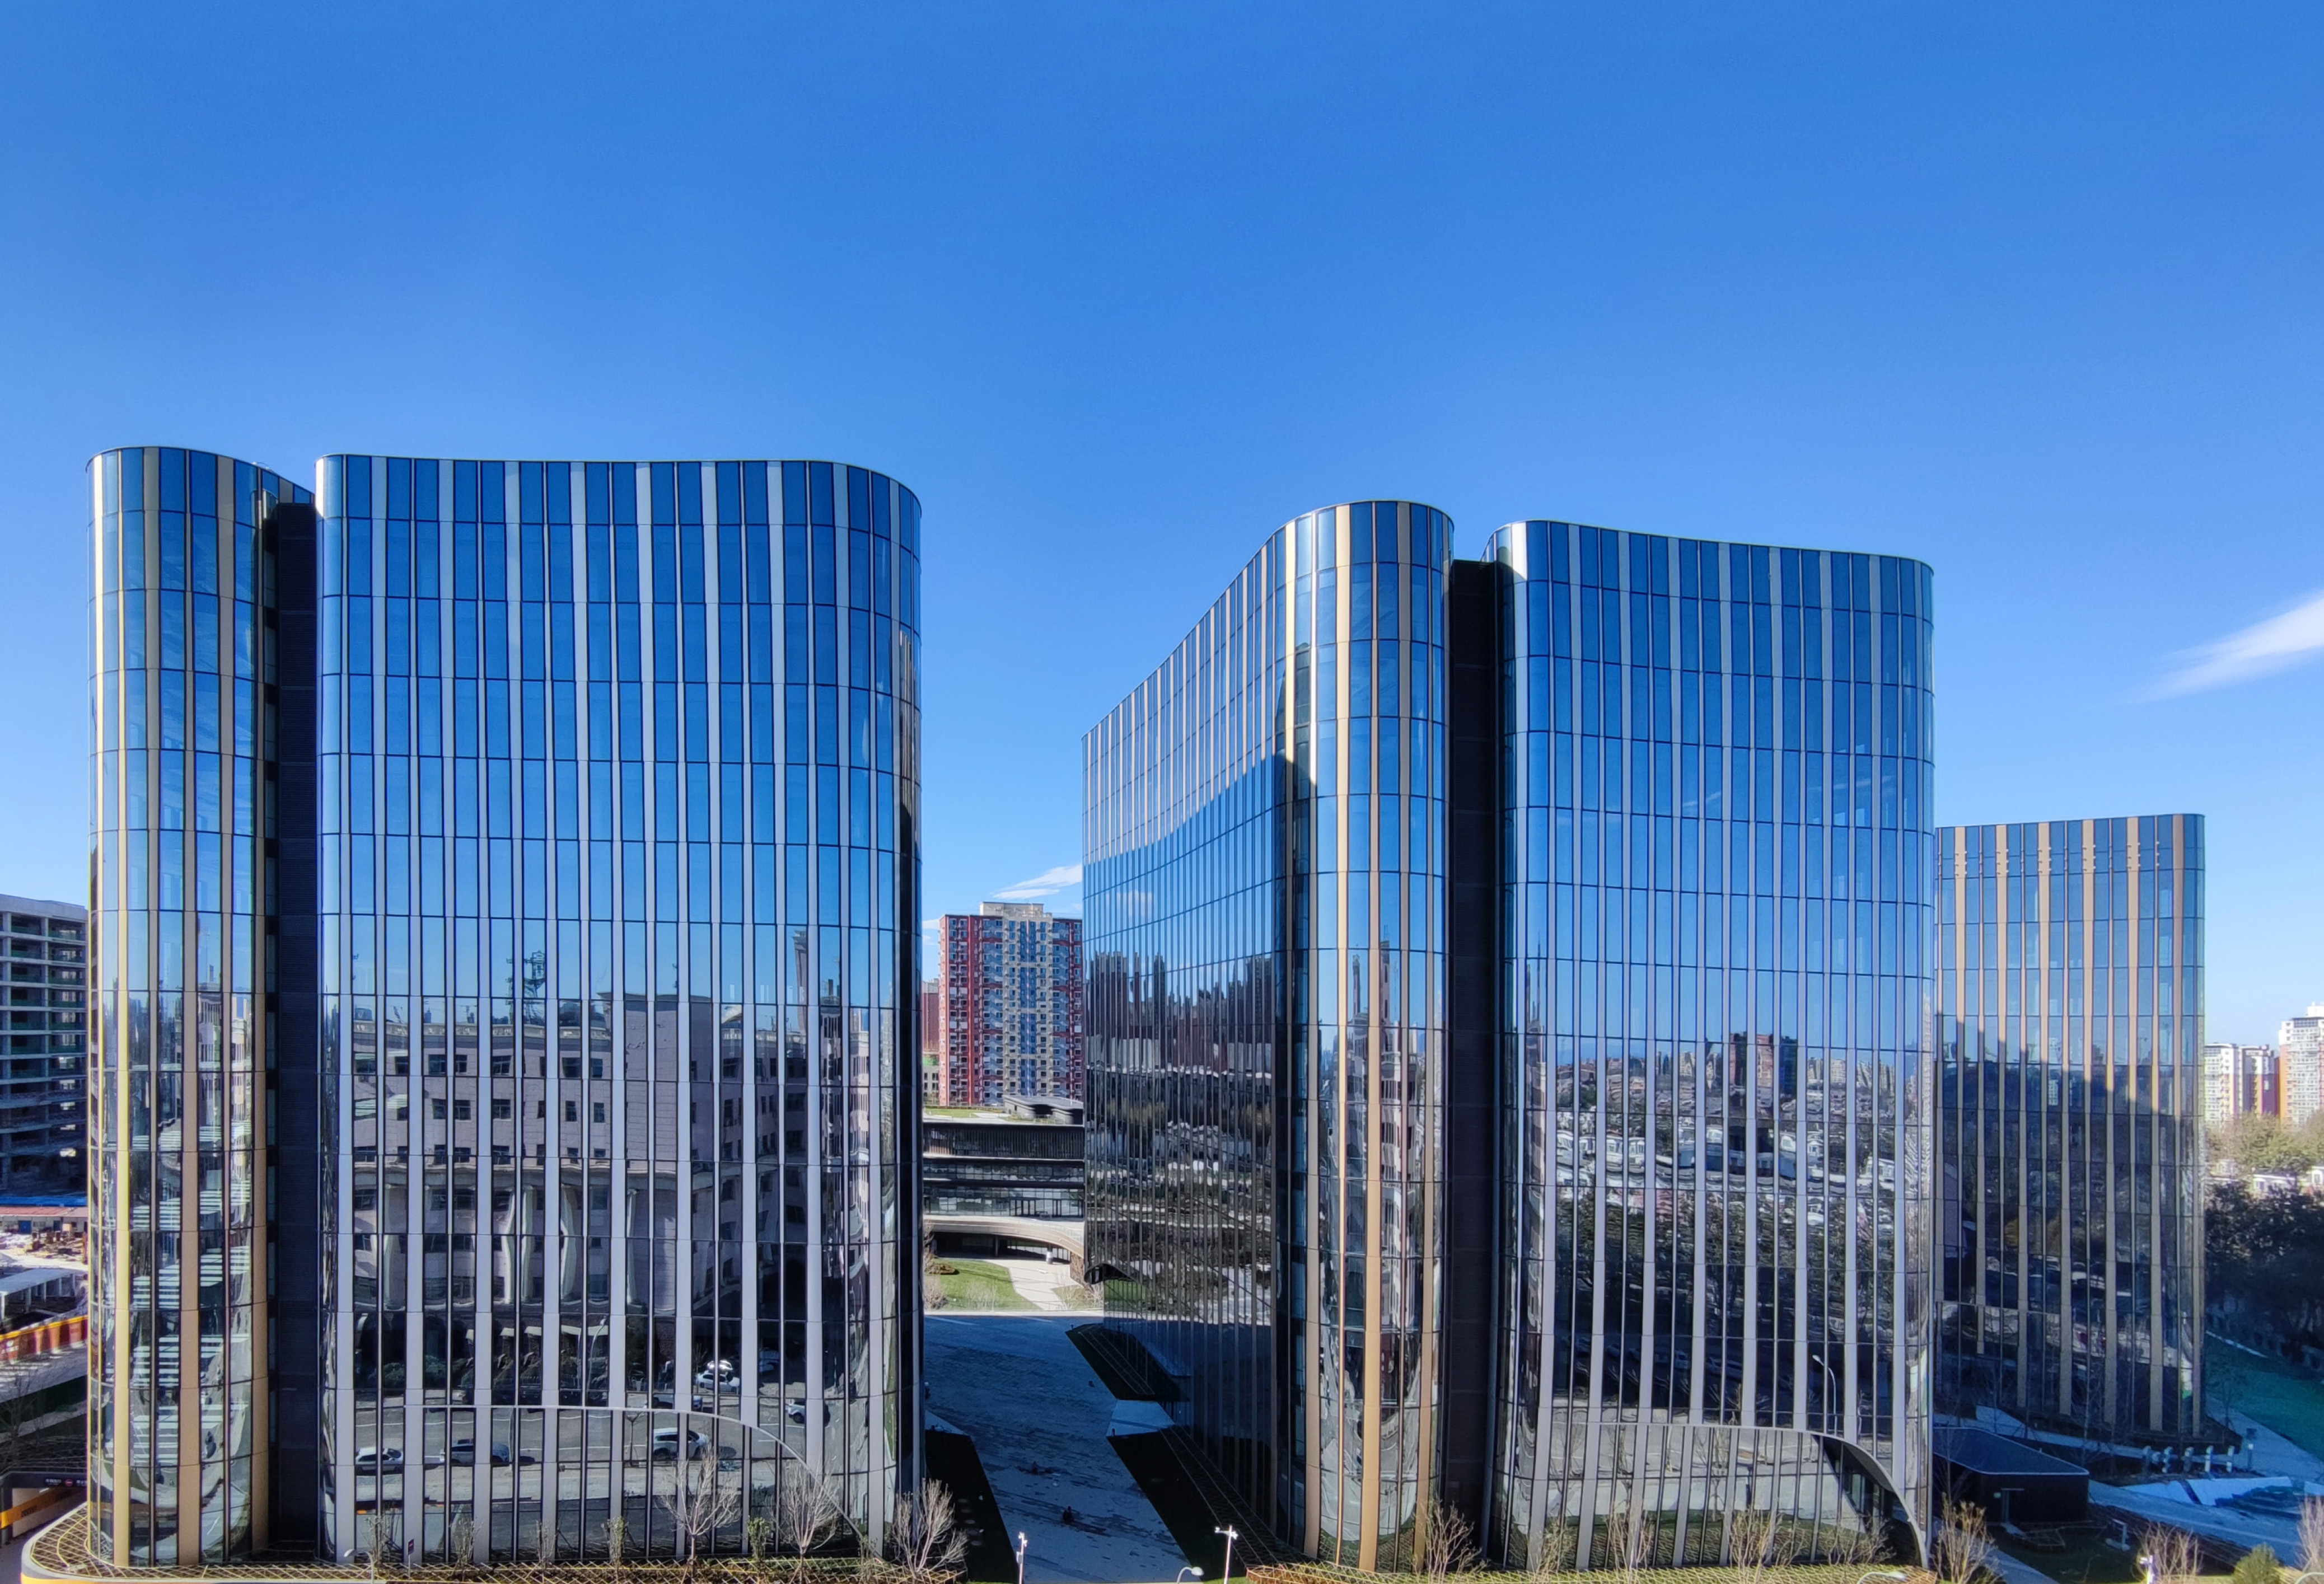 Beijing Jinyu Xisanqi Science and Technology Park